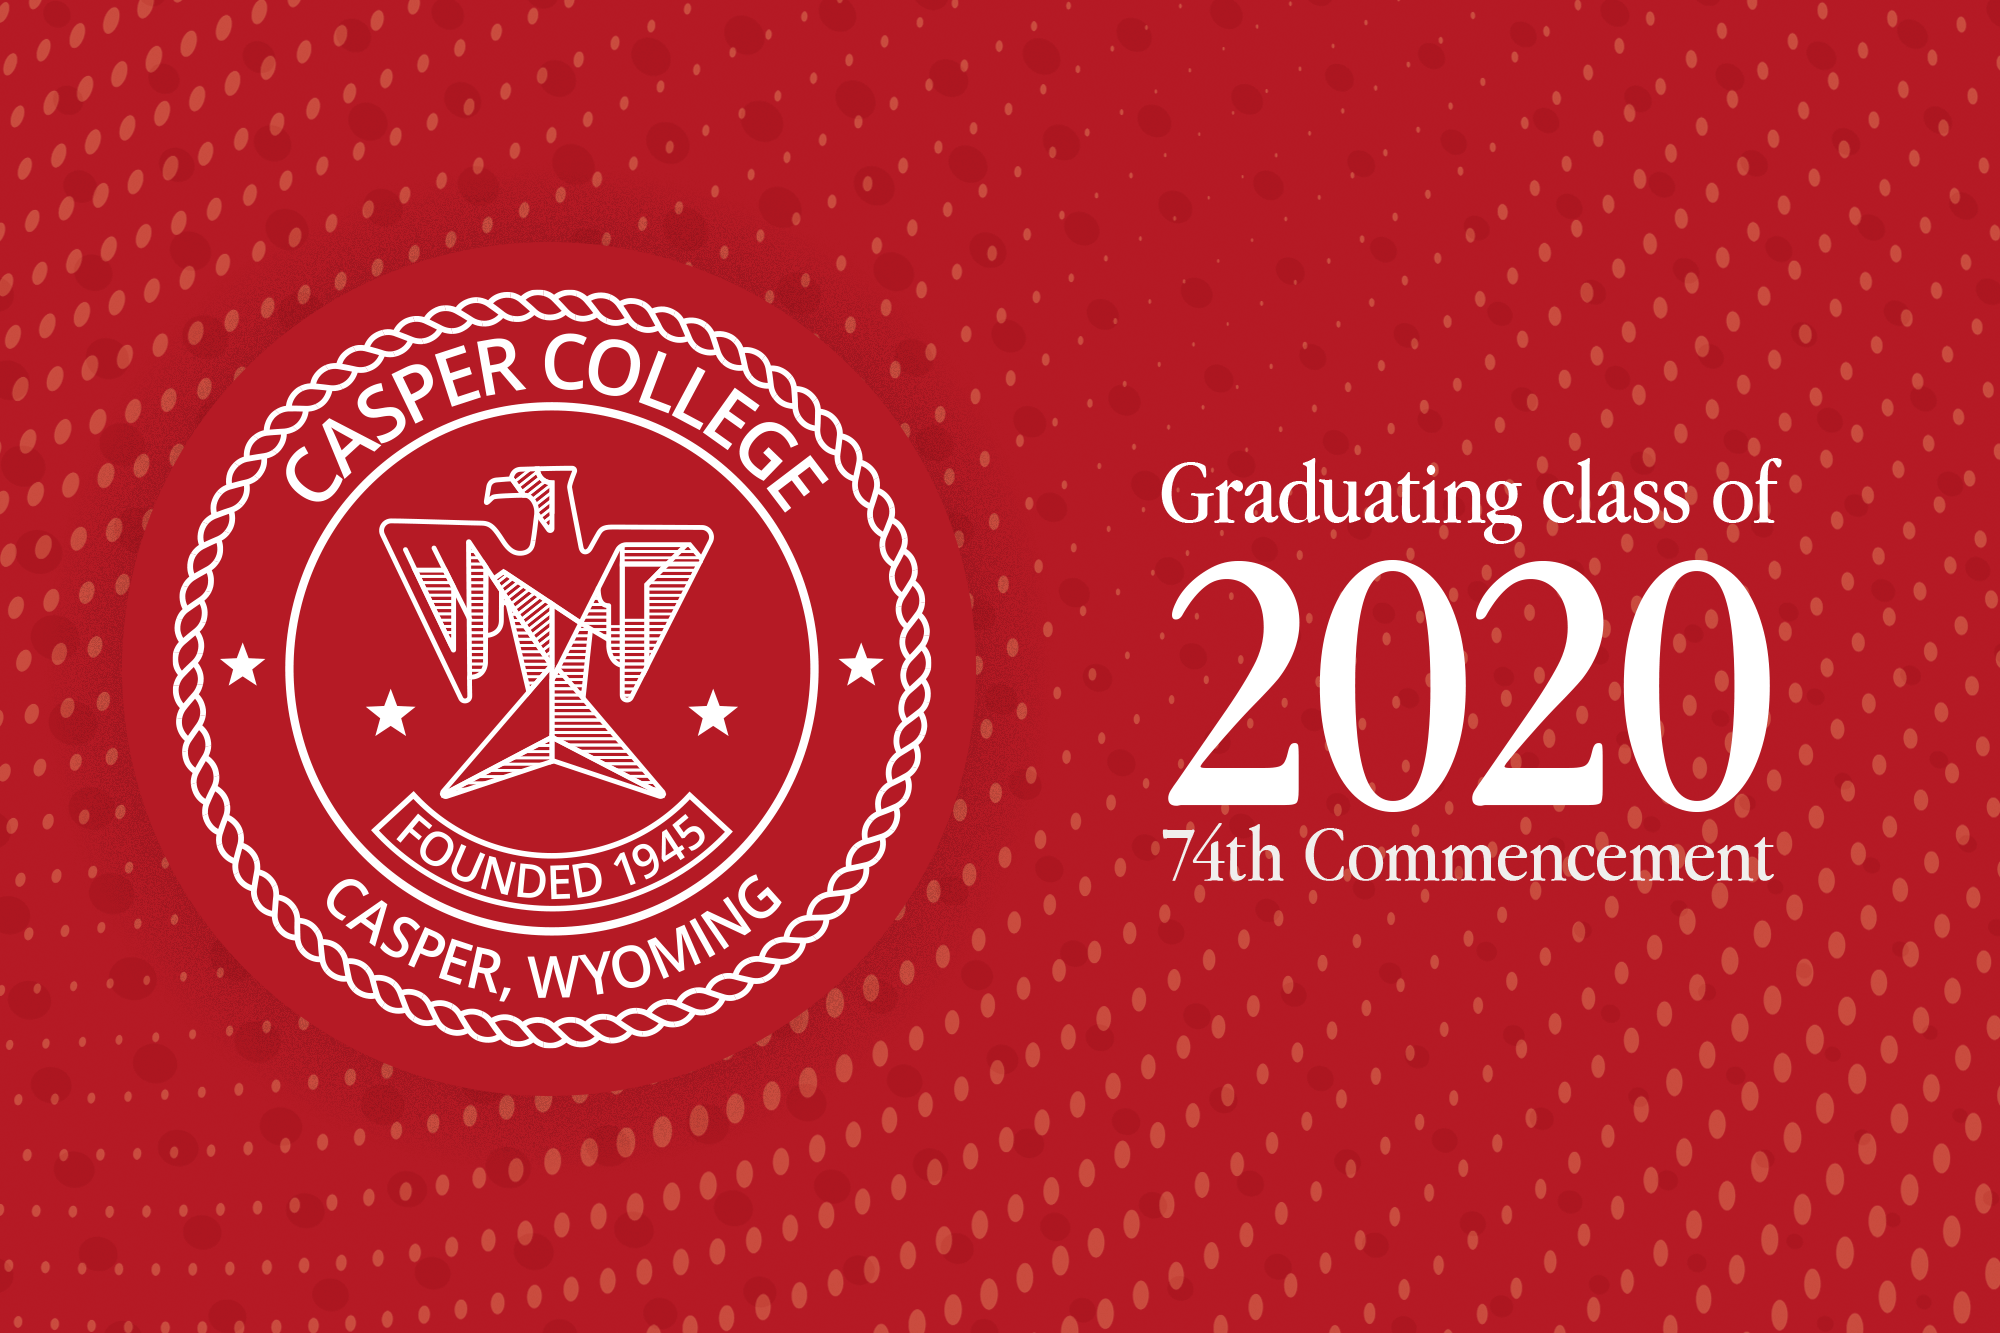 Red background with the words "Graduating class of 2020 74th Commencement."